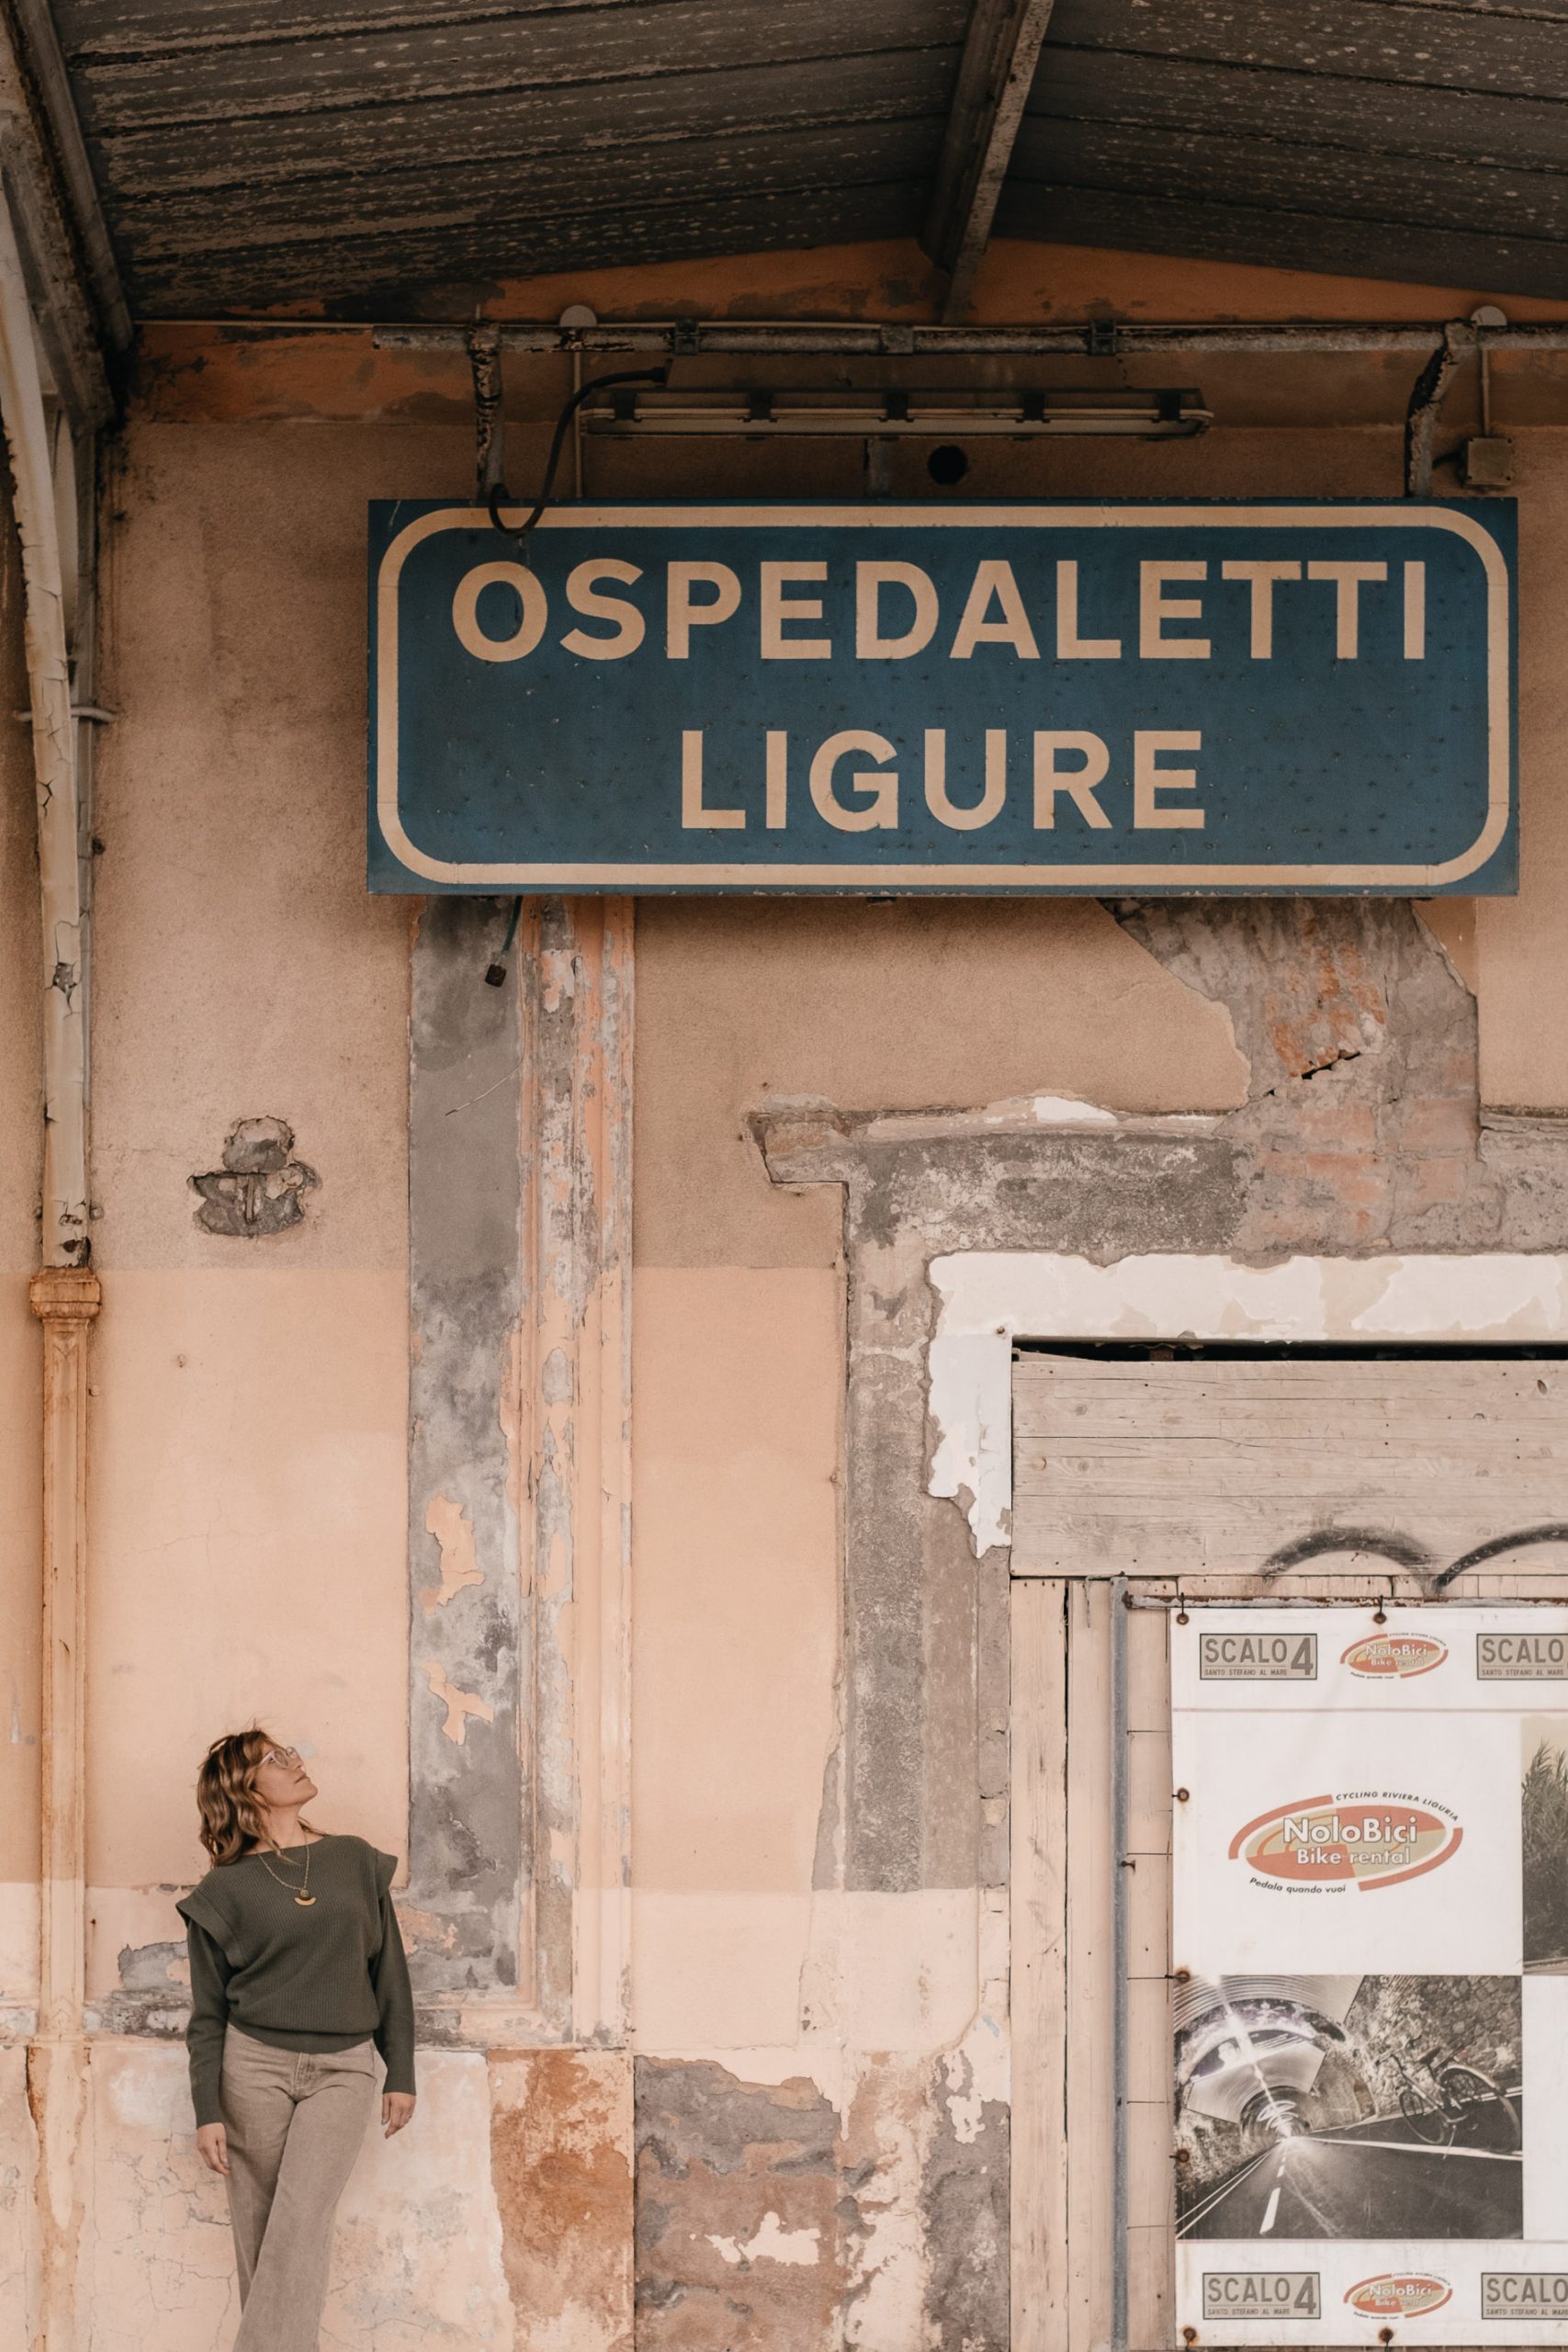 Floriana, the soul of Vayadù, poses at the old Ospedaletti railway, disused after the displacement of the old railroad line and the creation of the western Ligurian cycle path.